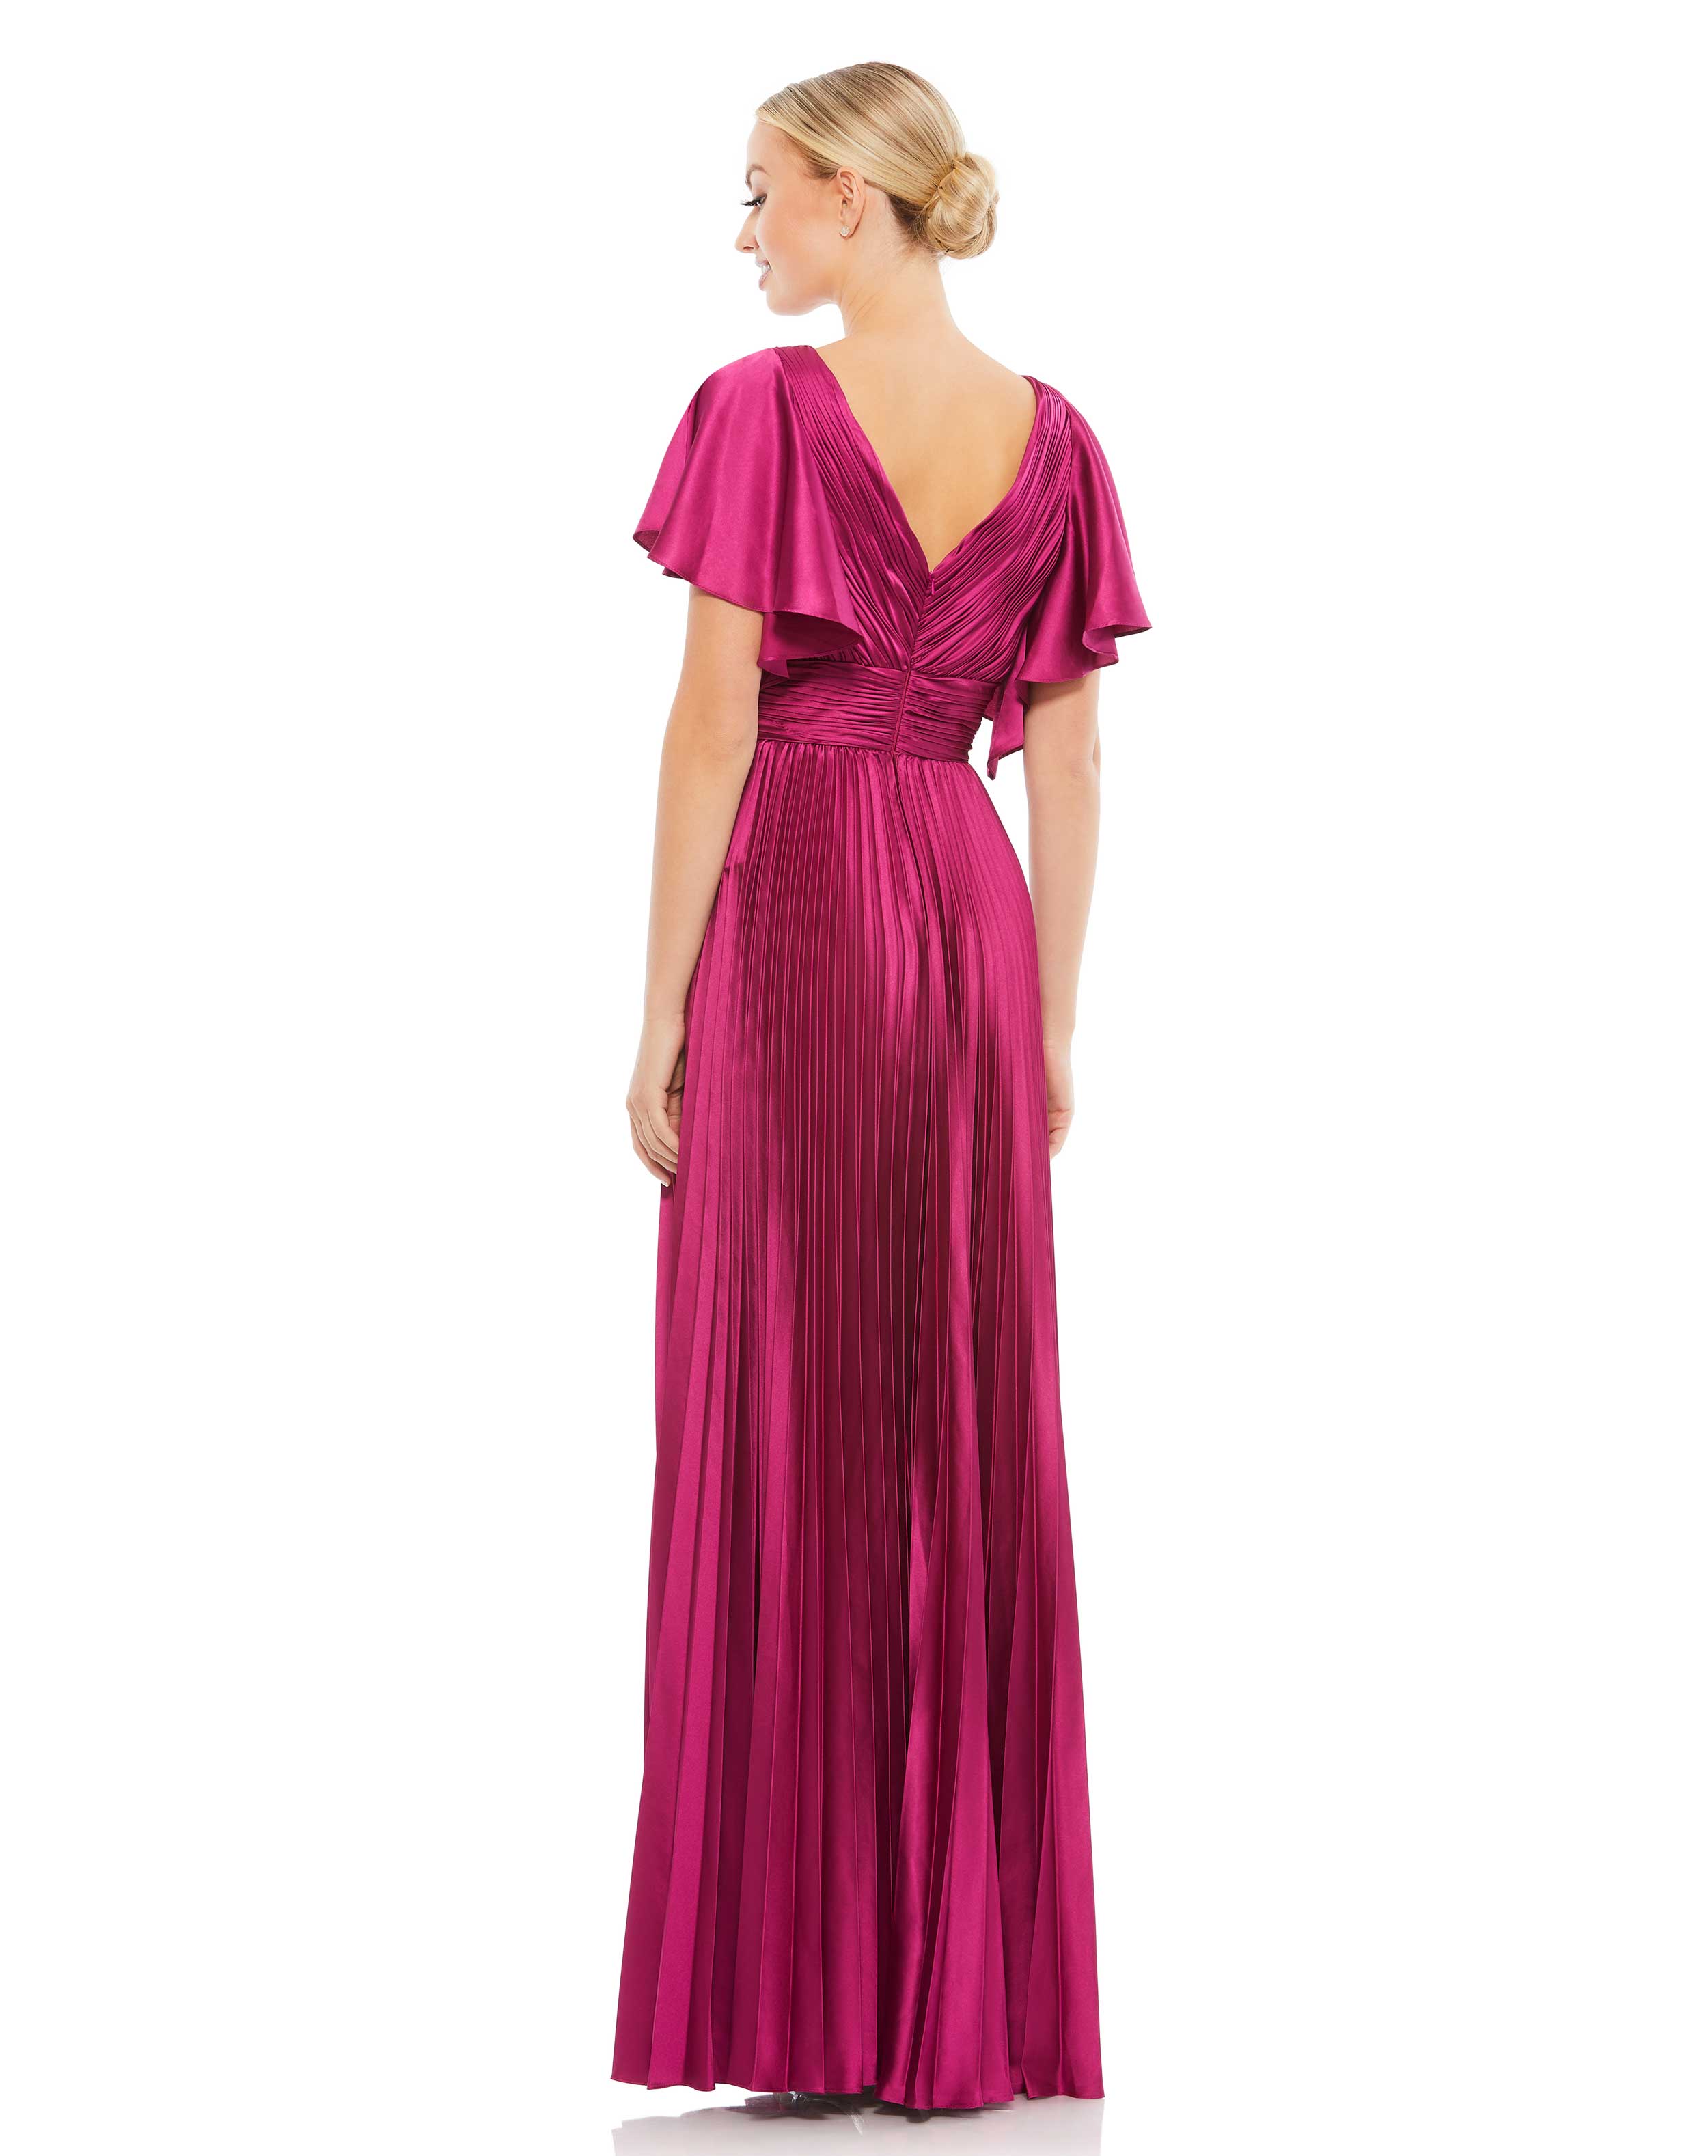 Pleated A-Line Flowing Sleeve Gown